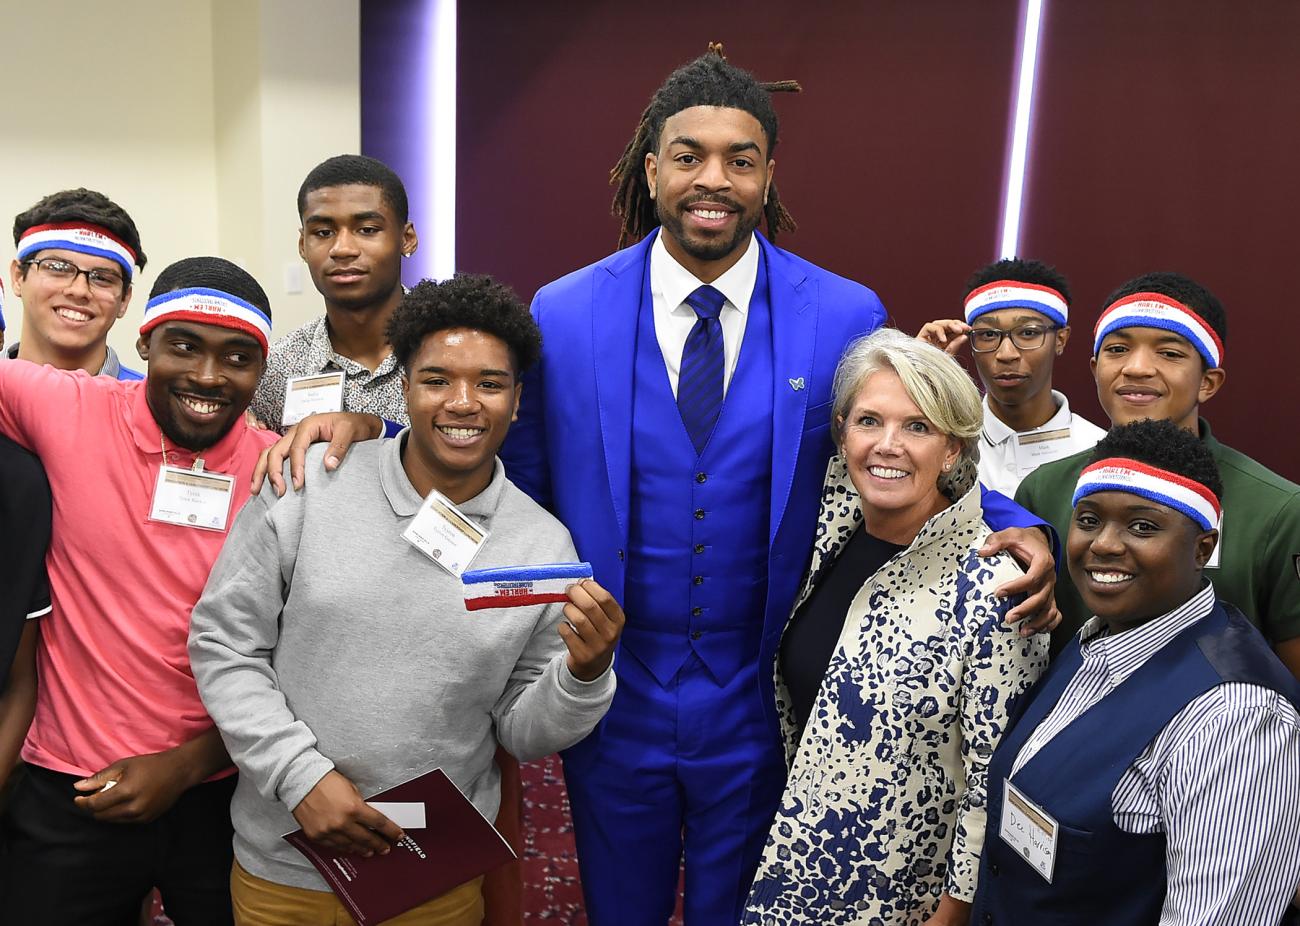 As part of the 2019 Springfield College Education and Leadership Luncheon, members of the Harlem Globetrotters met with local high school students.